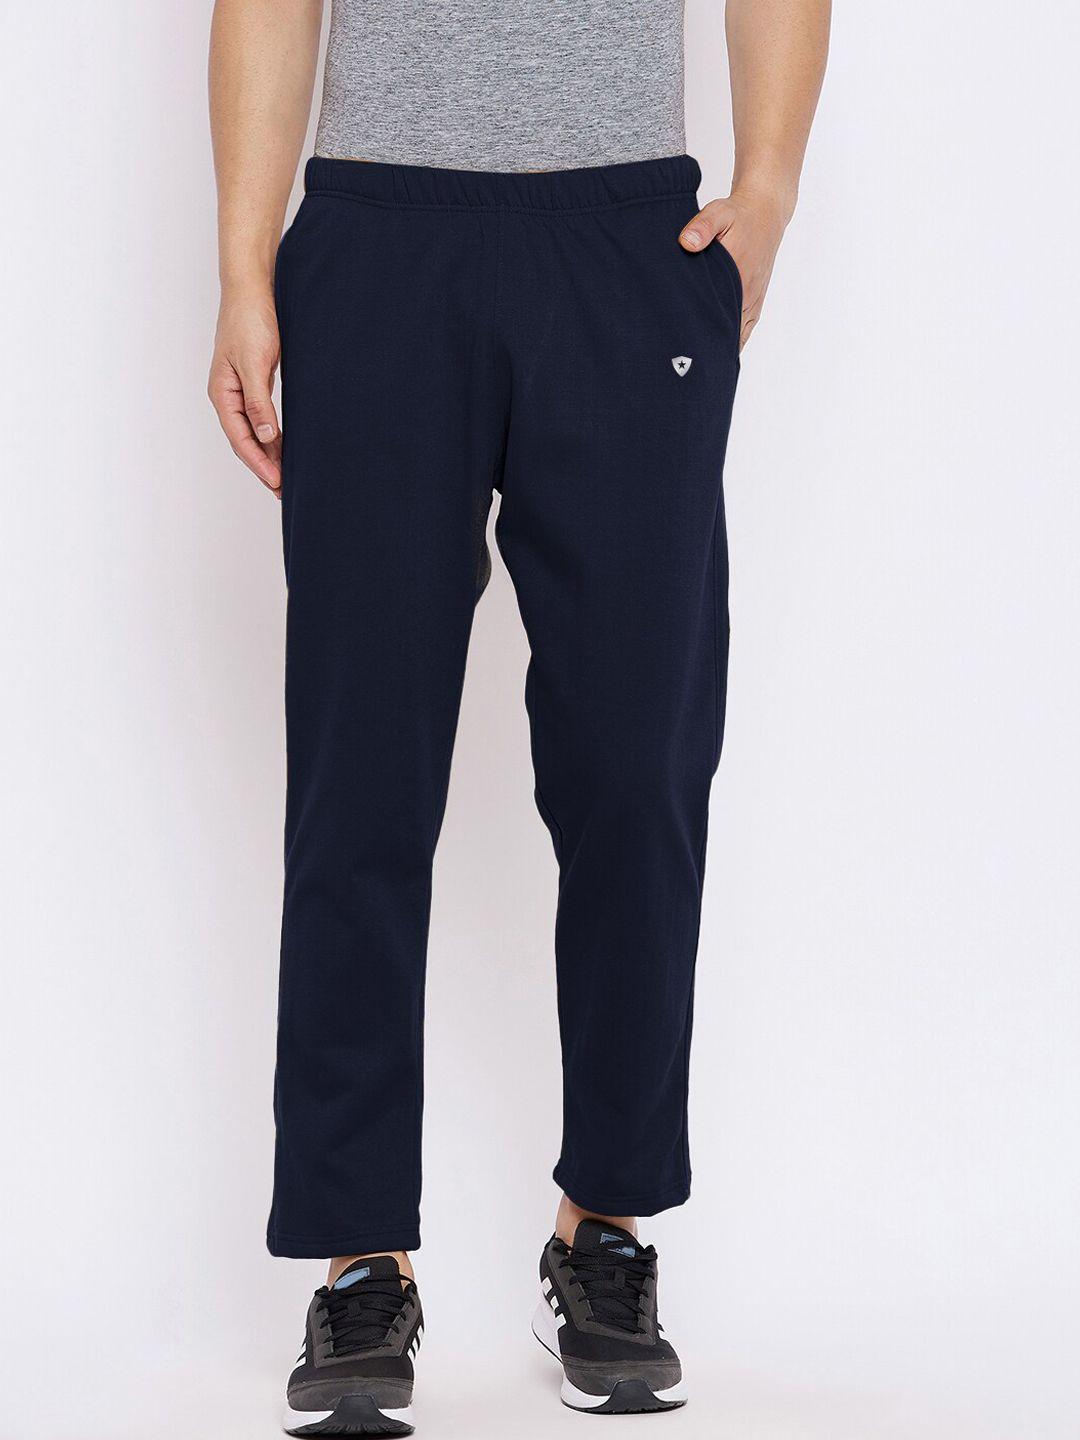 french flexious men navy blue solid loose-fit track pants